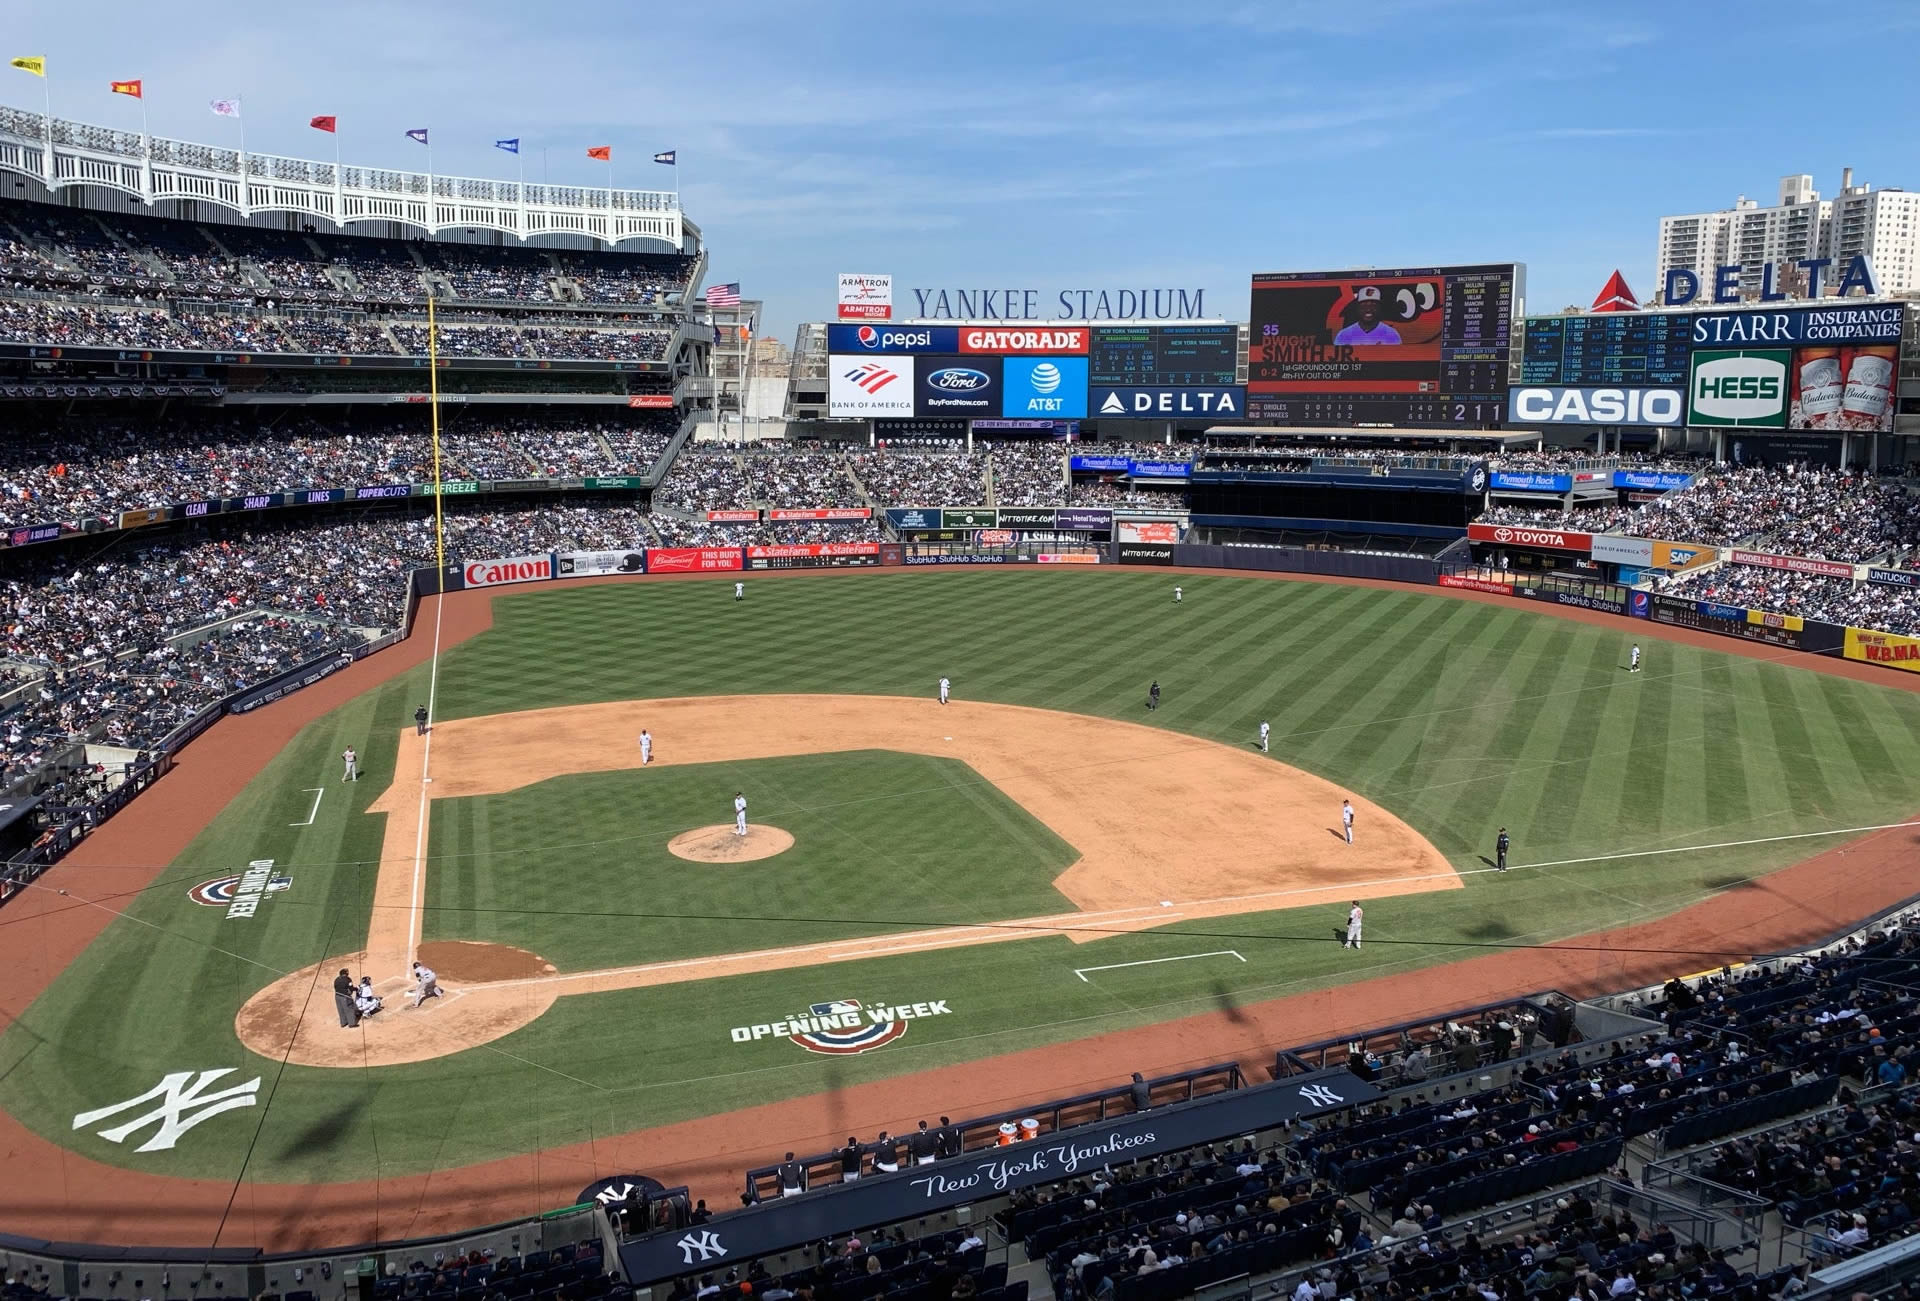 section 317, row 1 seat view  for baseball - yankee stadium